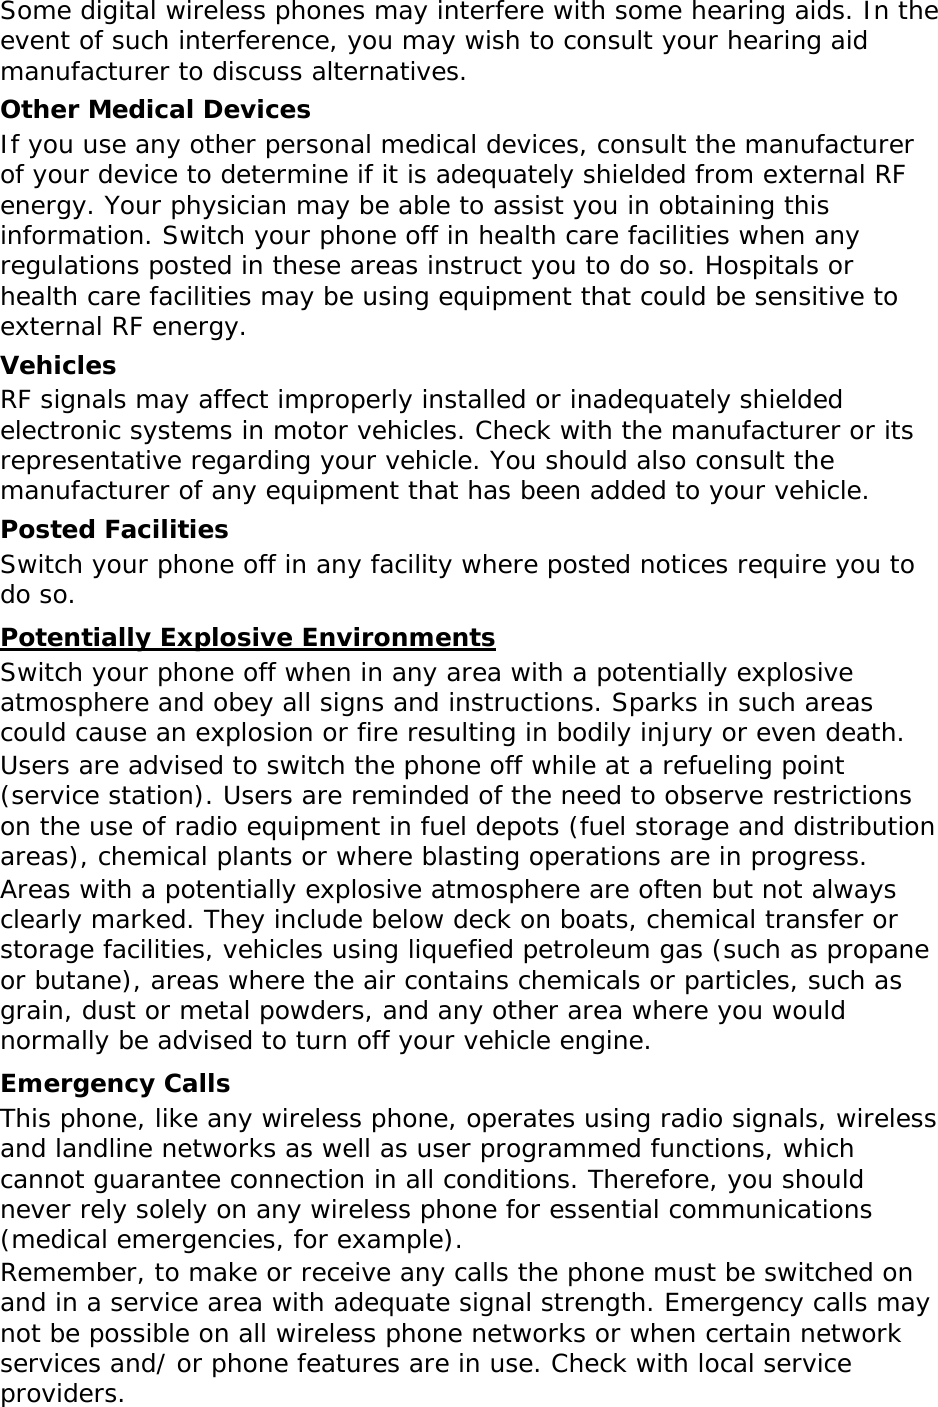 Some digital wireless phones may interfere with some hearing aids. In the event of such interference, you may wish to consult your hearing aid manufacturer to discuss alternatives. Other Medical Devices If you use any other personal medical devices, consult the manufacturer of your device to determine if it is adequately shielded from external RF energy. Your physician may be able to assist you in obtaining this information. Switch your phone off in health care facilities when any regulations posted in these areas instruct you to do so. Hospitals or health care facilities may be using equipment that could be sensitive to external RF energy. Vehicles RF signals may affect improperly installed or inadequately shielded electronic systems in motor vehicles. Check with the manufacturer or its representative regarding your vehicle. You should also consult the manufacturer of any equipment that has been added to your vehicle. Posted Facilities Switch your phone off in any facility where posted notices require you to do so. UPotentially Explosive Environments Switch your phone off when in any area with a potentially explosive atmosphere and obey all signs and instructions. Sparks in such areas could cause an explosion or fire resulting in bodily injury or even death. Users are advised to switch the phone off while at a refueling point (service station). Users are reminded of the need to observe restrictions on the use of radio equipment in fuel depots (fuel storage and distribution areas), chemical plants or where blasting operations are in progress. Areas with a potentially explosive atmosphere are often but not always clearly marked. They include below deck on boats, chemical transfer or storage facilities, vehicles using liquefied petroleum gas (such as propane or butane), areas where the air contains chemicals or particles, such as grain, dust or metal powders, and any other area where you would normally be advised to turn off your vehicle engine. Emergency Calls This phone, like any wireless phone, operates using radio signals, wireless and landline networks as well as user programmed functions, which cannot guarantee connection in all conditions. Therefore, you should never rely solely on any wireless phone for essential communications (medical emergencies, for example). Remember, to make or receive any calls the phone must be switched on and in a service area with adequate signal strength. Emergency calls may not be possible on all wireless phone networks or when certain network services and/ or phone features are in use. Check with local service providers. 